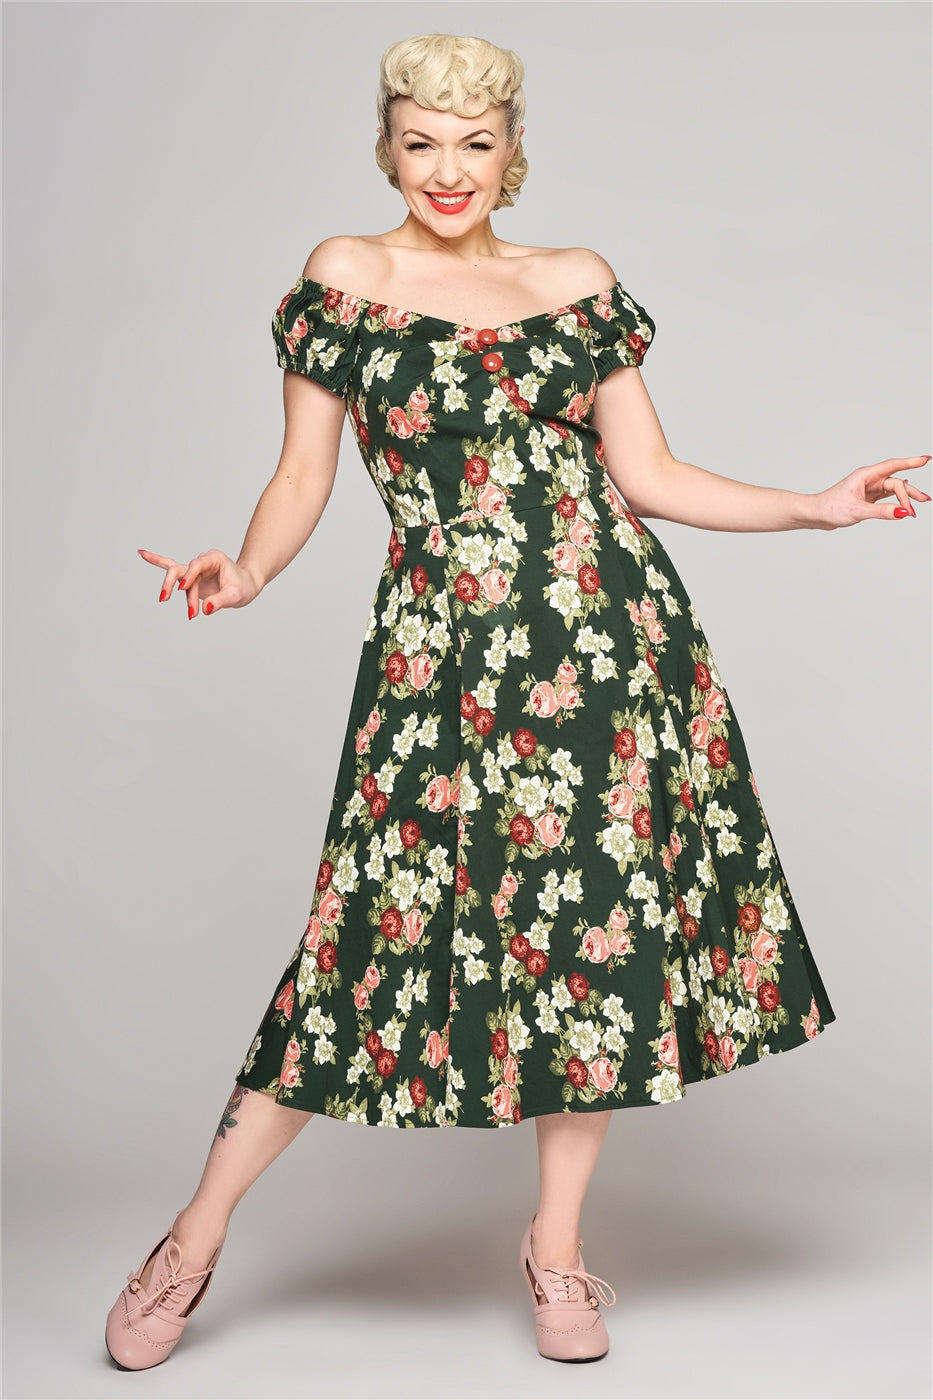 Elegant slim blonde woman smiling and holding her hands out to the sides. She is wearing the Vintage Bloom Dolores Dress and pink heeled shoes